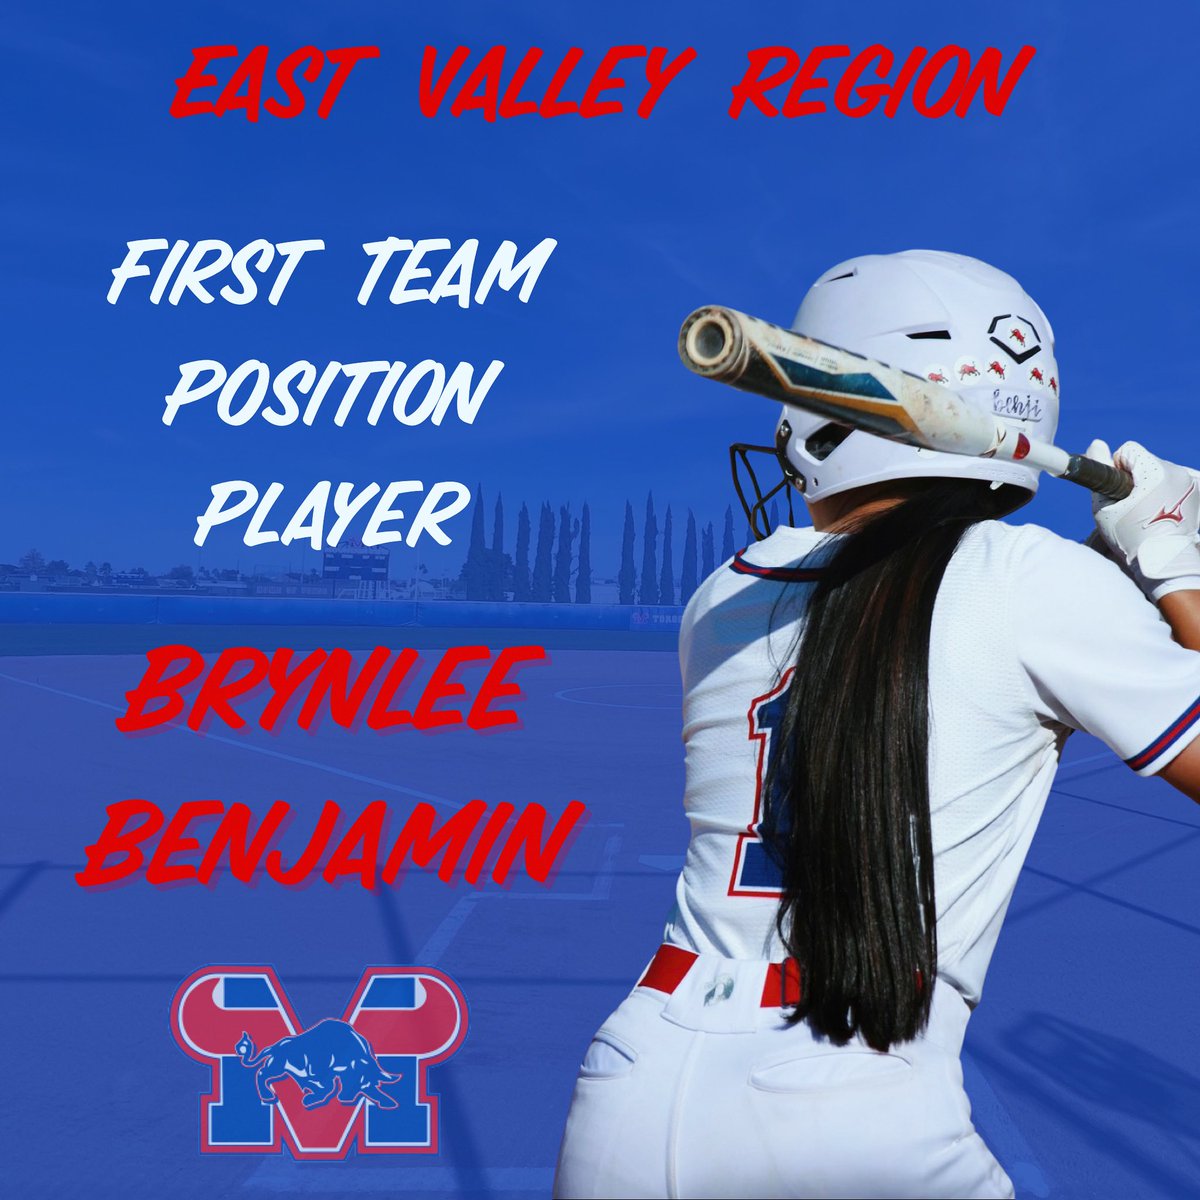 Senior Brynlee Benjamin is awarded First Team Position Player for East Valley Region. Congratulations on an awesome season Brynlee!